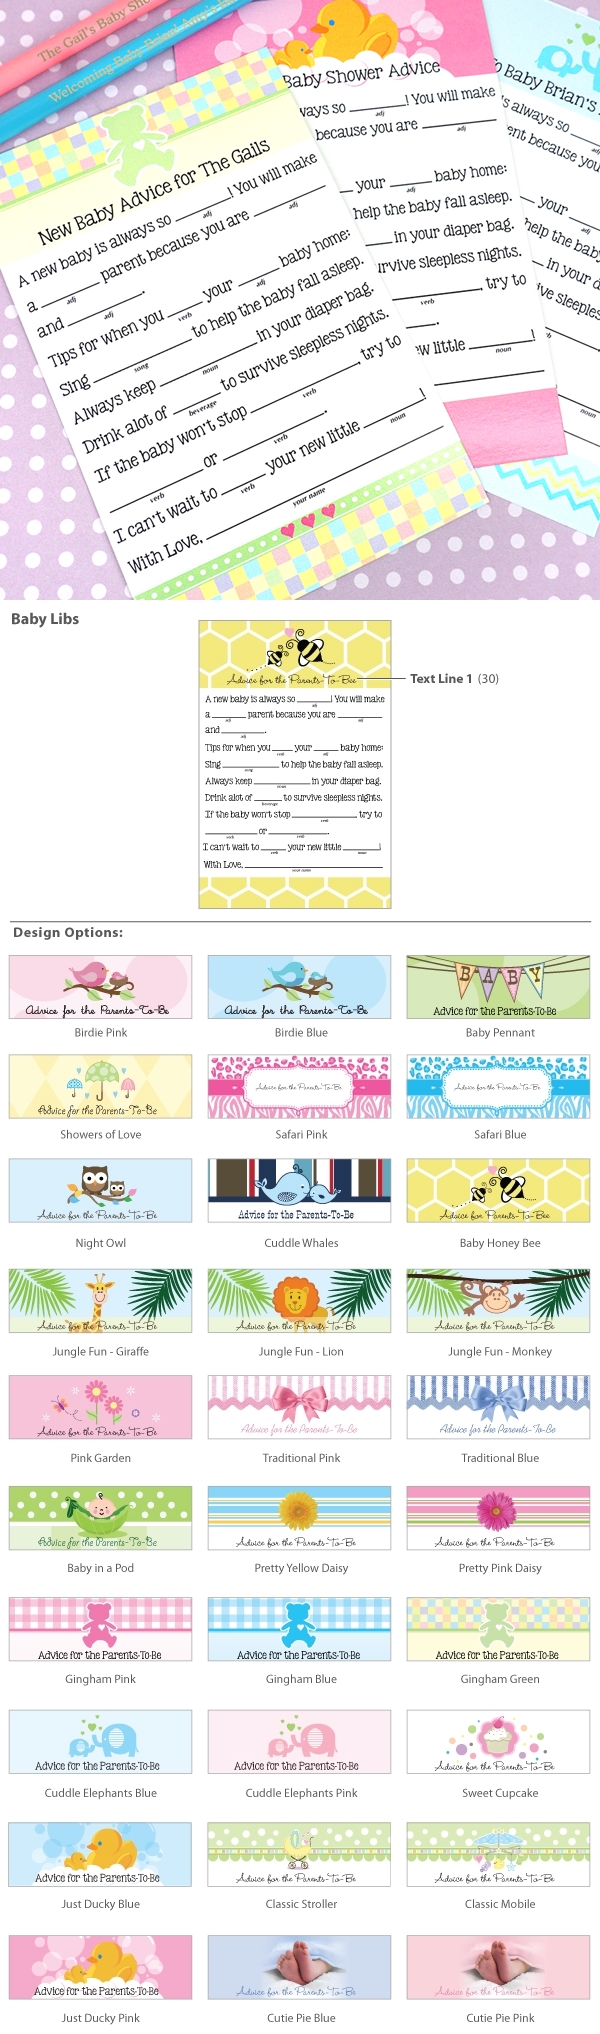 Personalized 'Baby Libs' Baby Shower Advice Cards (Set of 25)